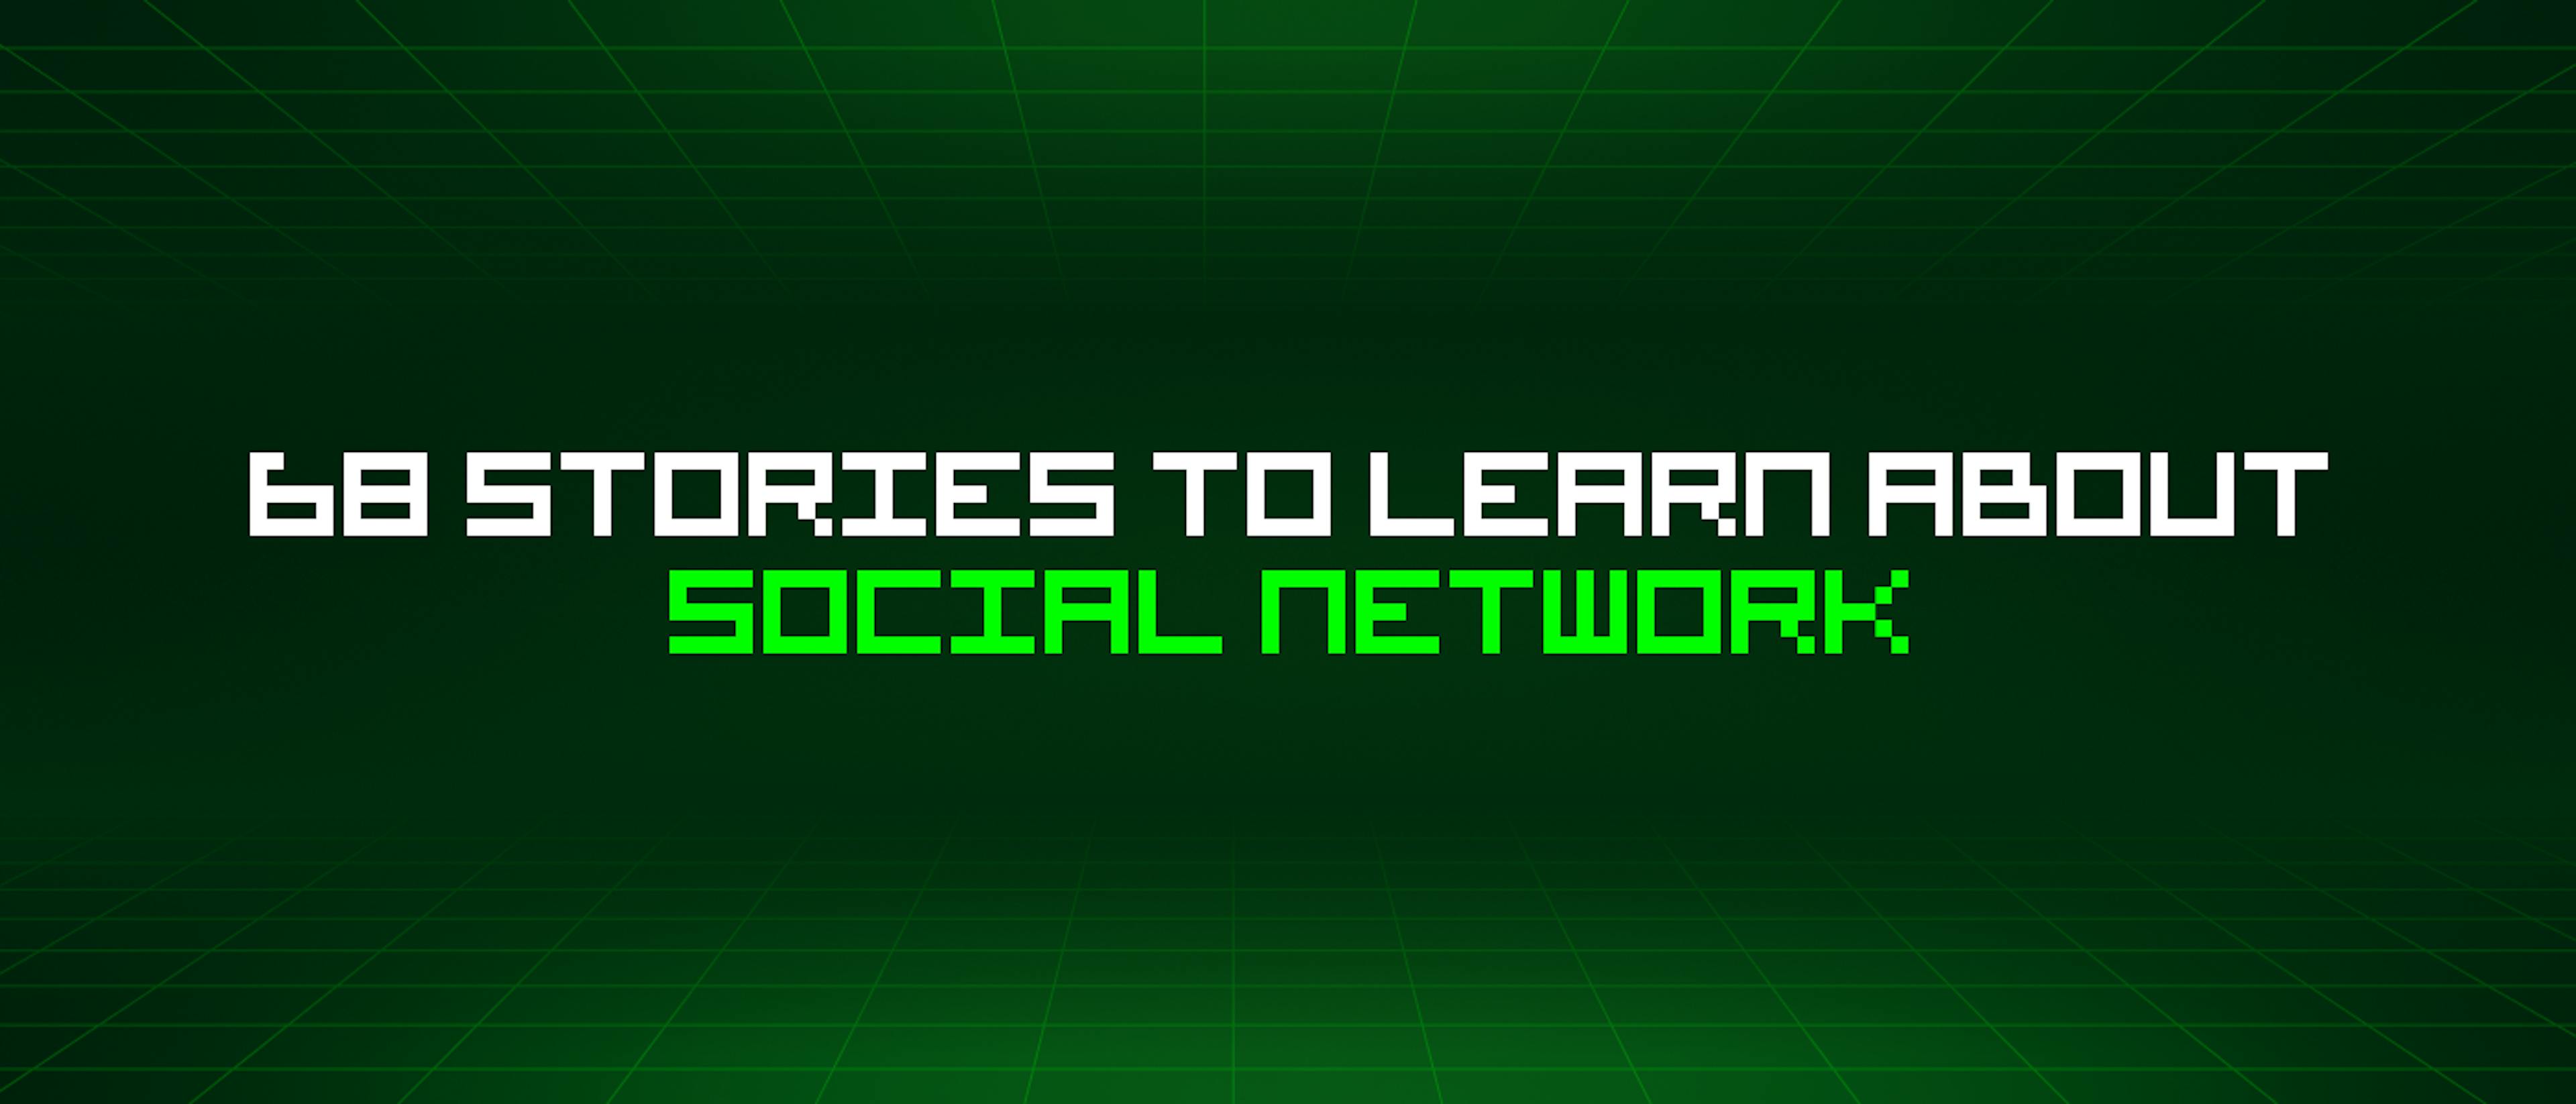 /68-stories-to-learn-about-social-network feature image